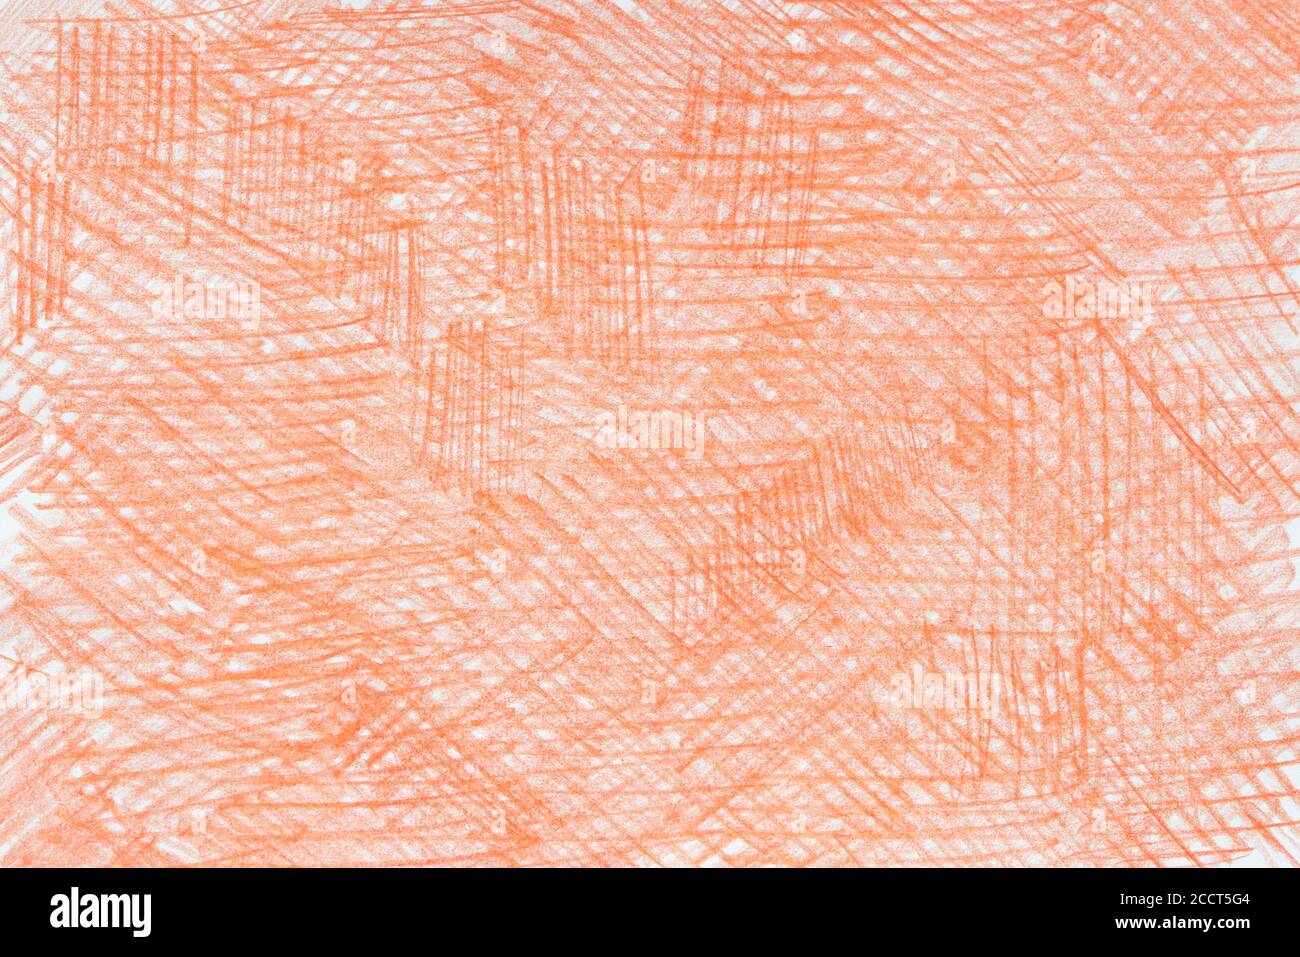 orange color abstract crayon drawing paper background texture Stock Photo